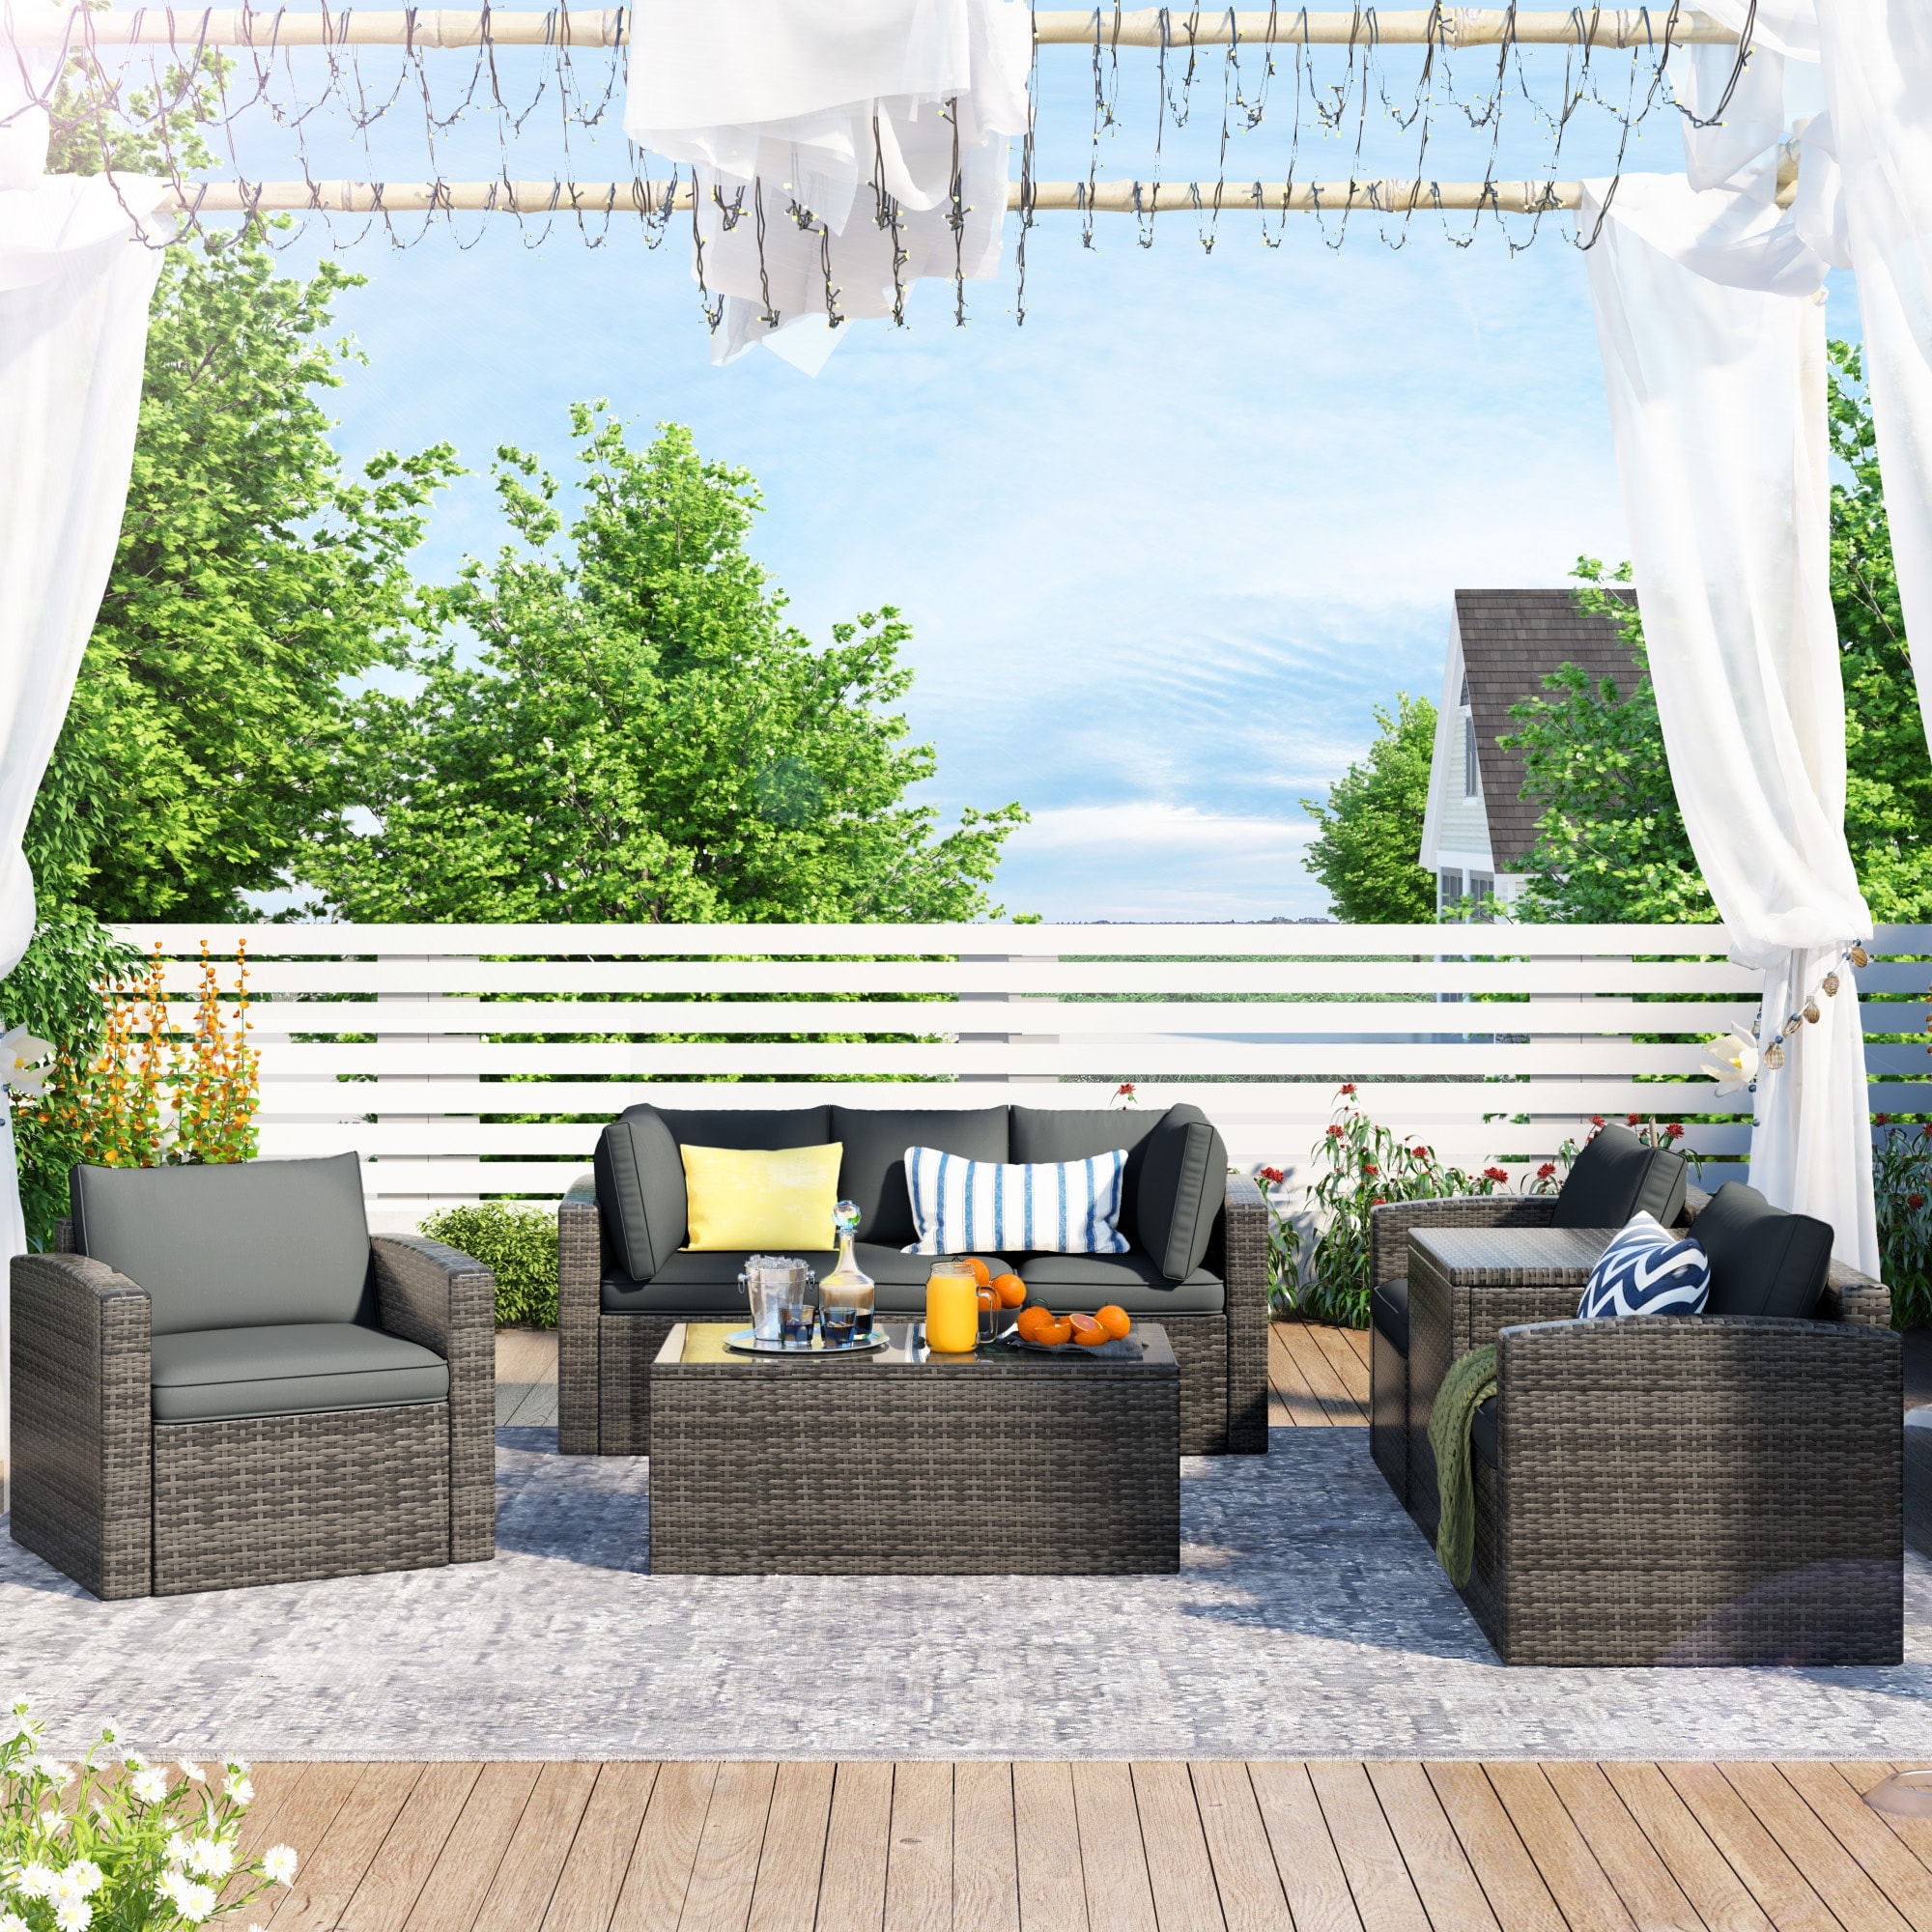 7-piece Patio Wicker Sofa Pe Rattan Arm Chairs Set With Table And Storage Box